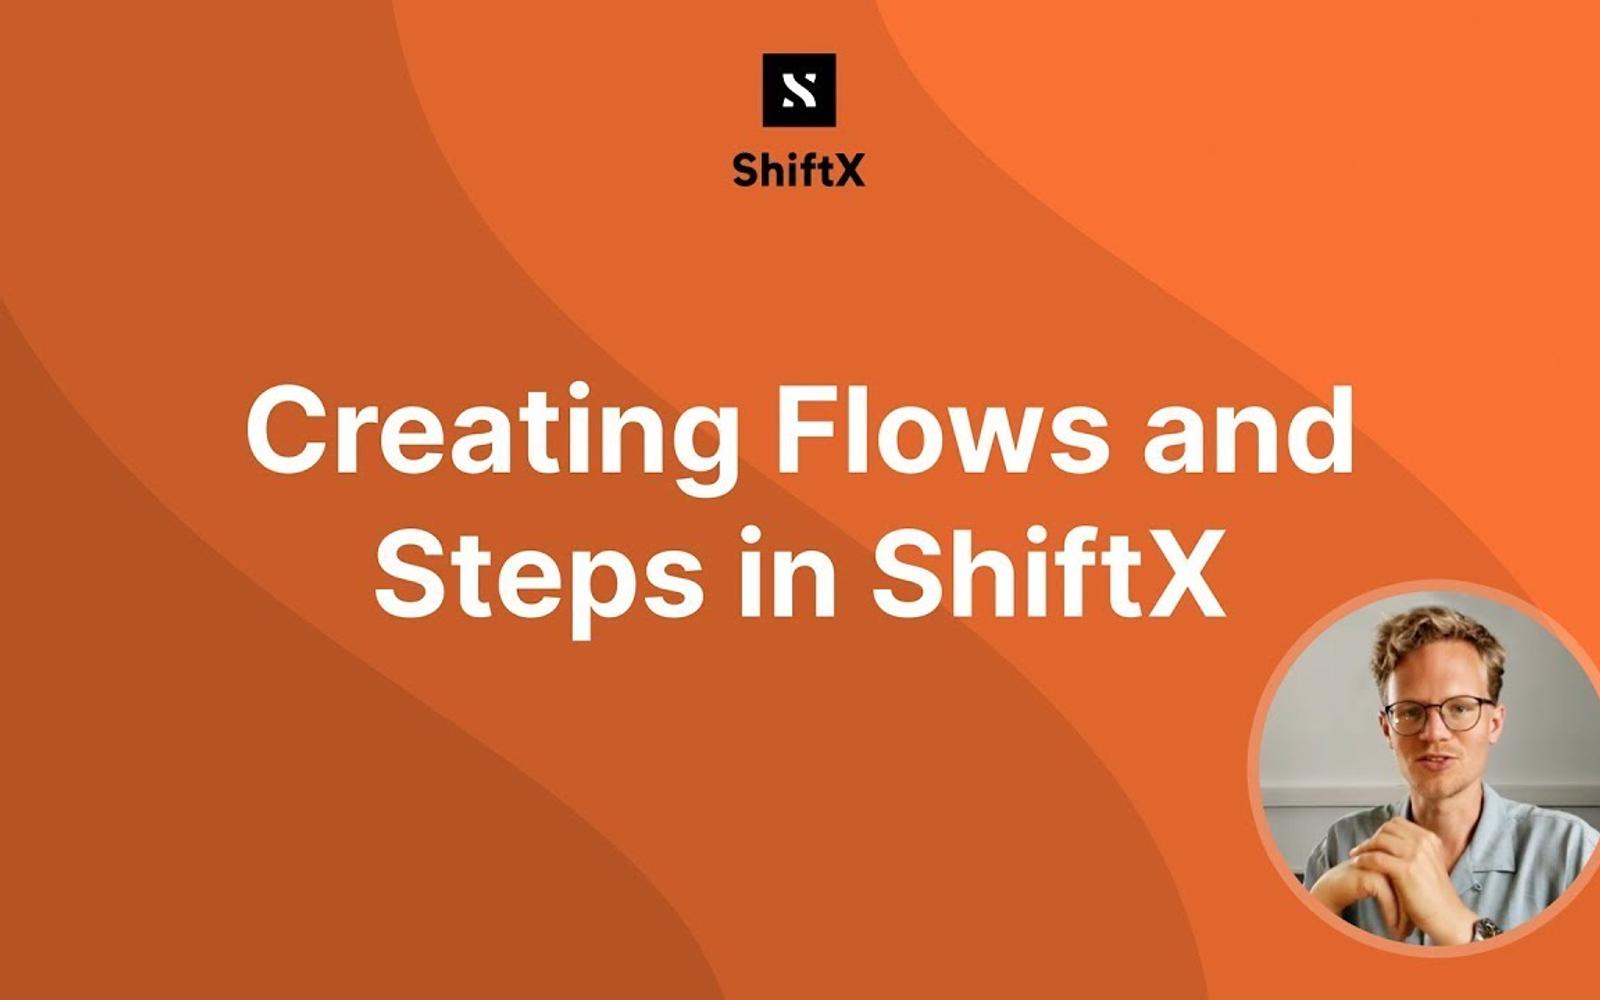 Screenshot of a ShiftX Youtube tutorial explaining how to get started with flows and steps in ShiftX